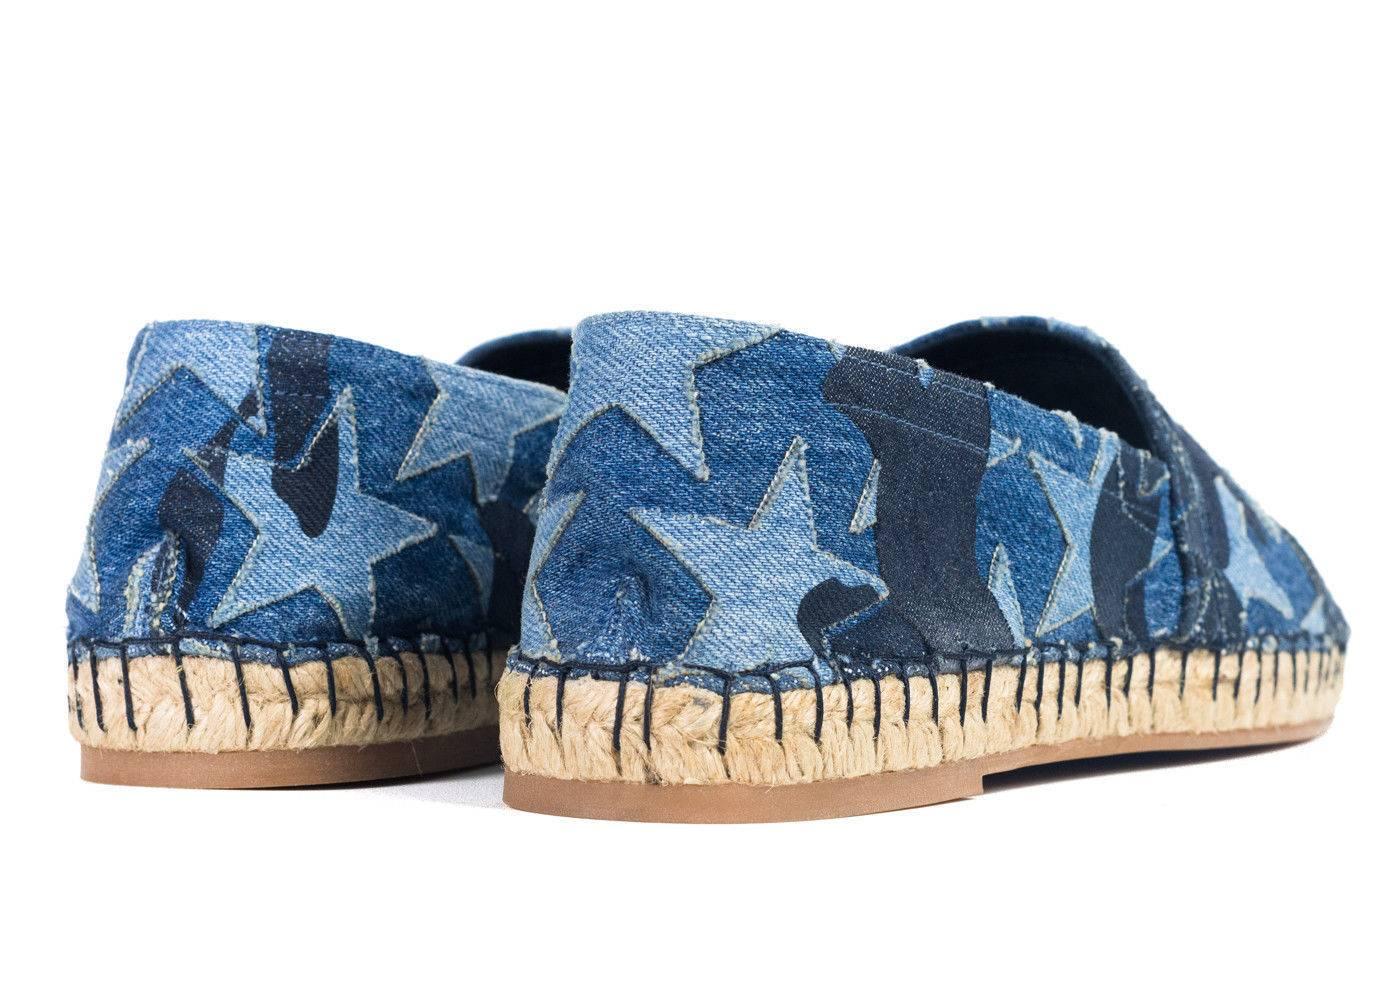 Valentino Garavani's espadrilles are crafted of blue denim appliquéd with light blue star and indigo camouflage self-patches.


0.5